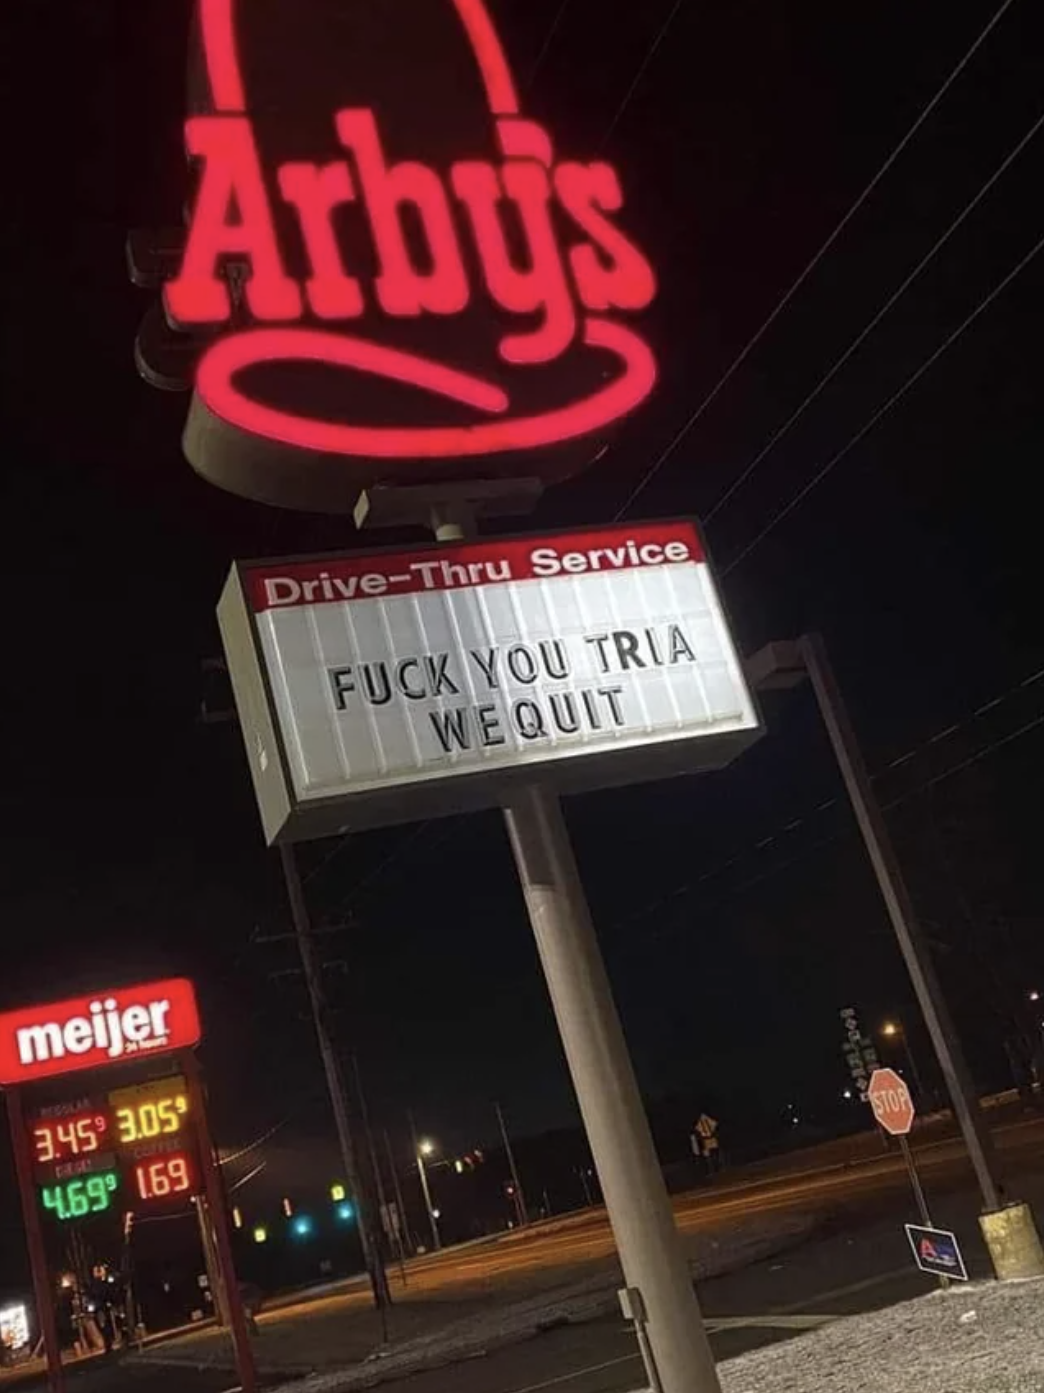 An Arby&#x27;s sign saying, &quot;Fuck you Tria, we quit&quot;